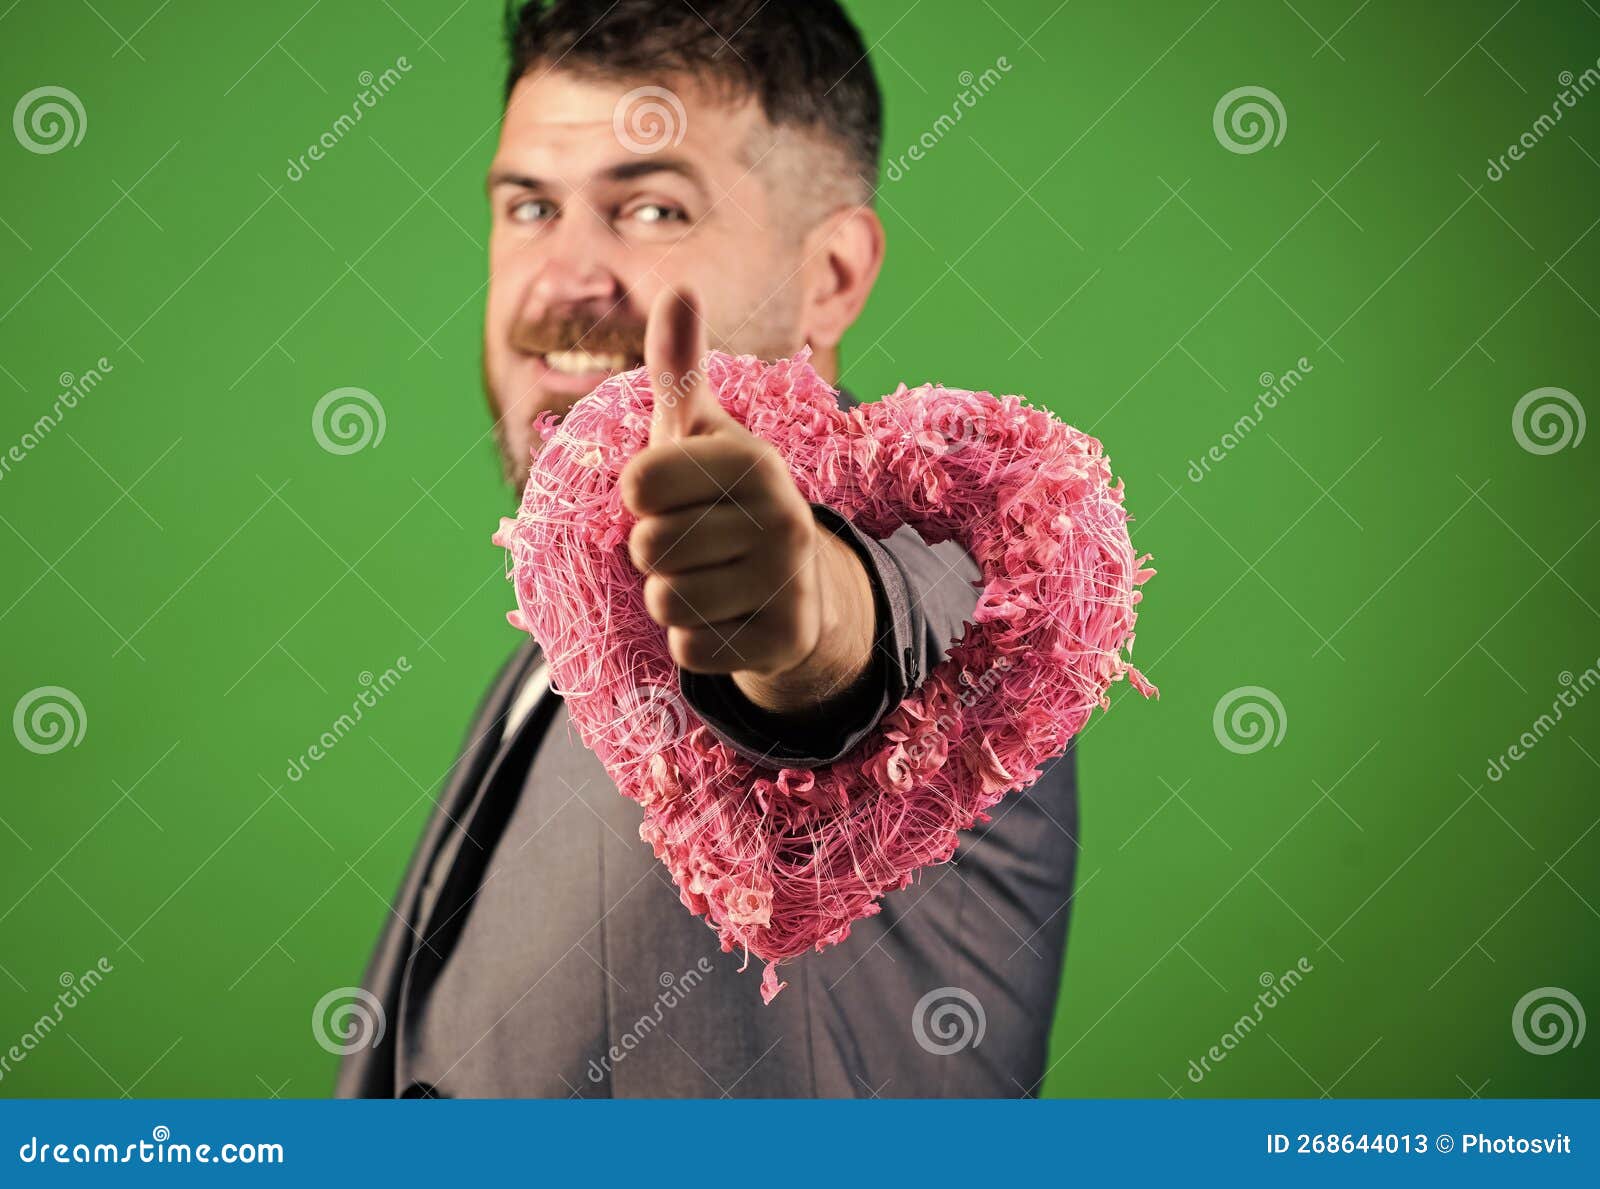 Romantic Macho Man With Beard Celebrate Valentines Day Love And Romantic Concept Ideas For